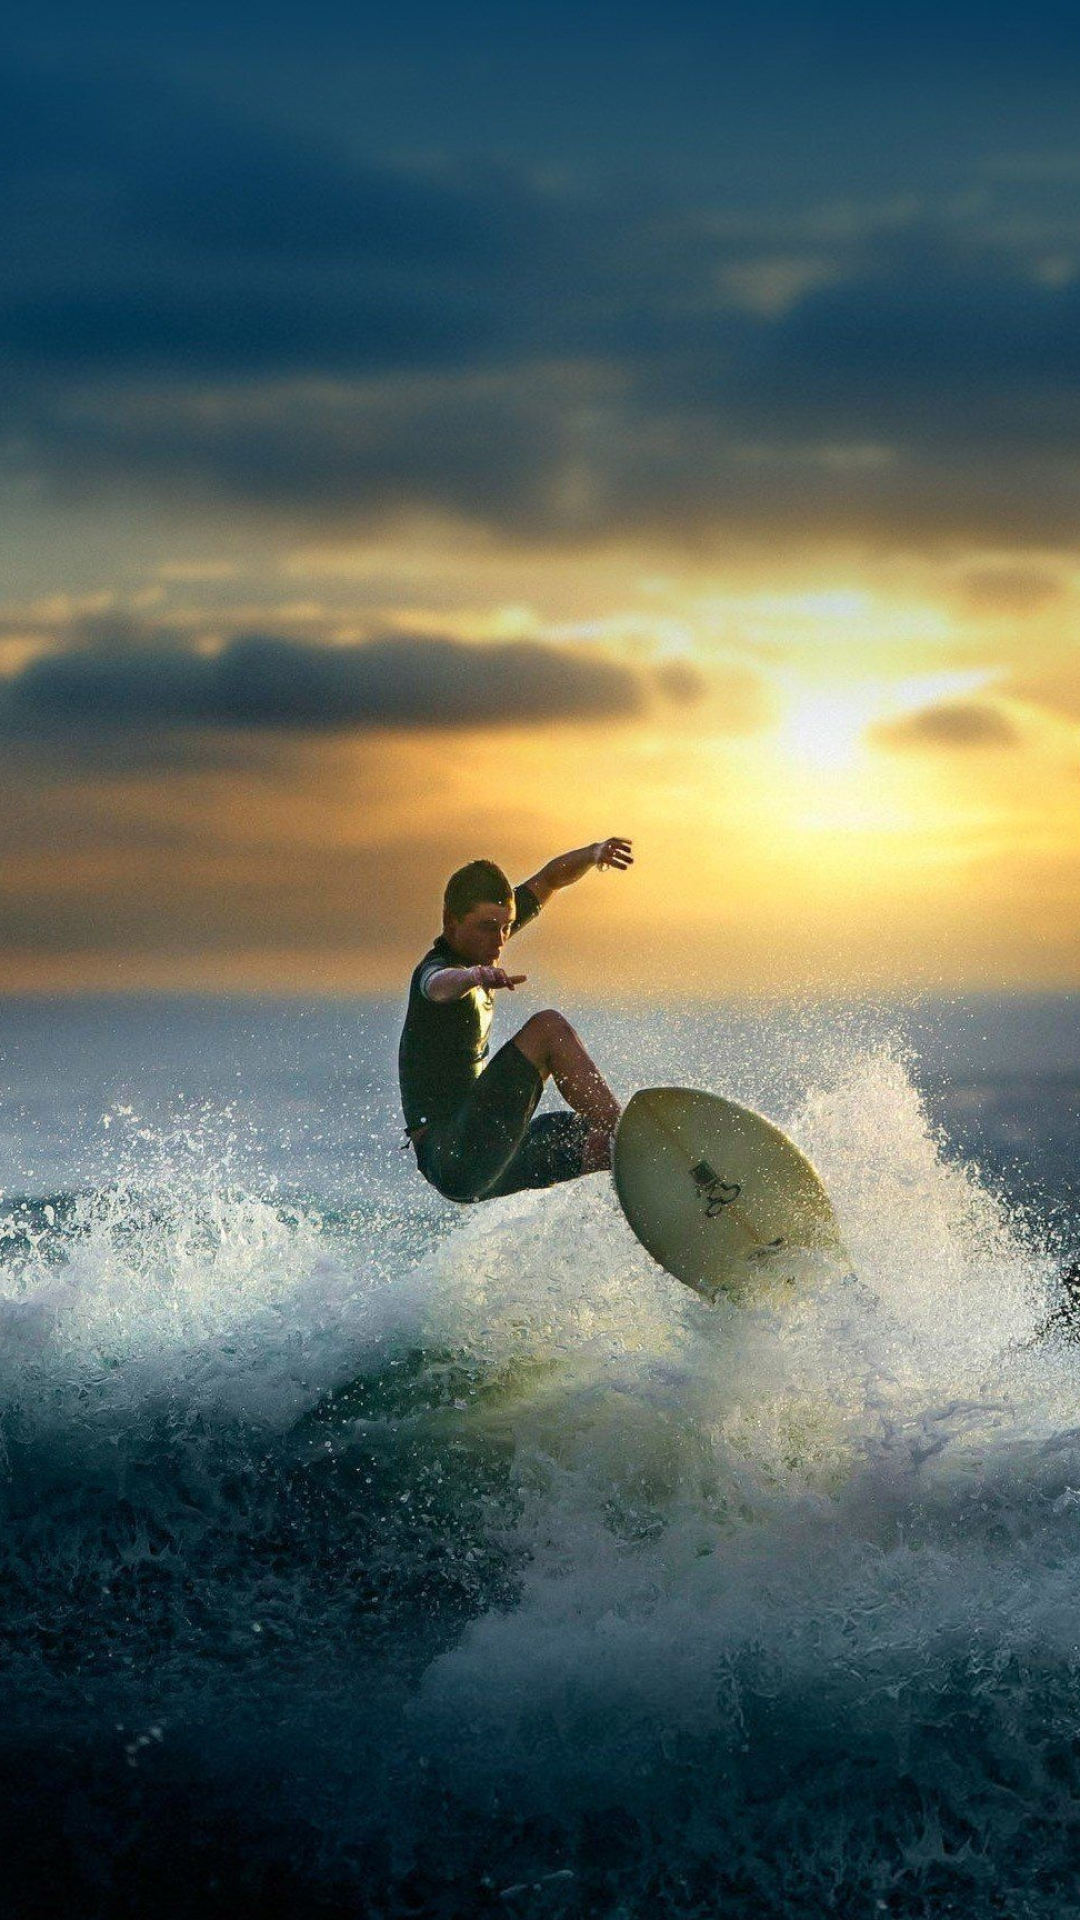 Surfing: Alley Oop intense air jump stunt, Shortboarding performance by a professional surfer. 1080x1920 Full HD Background.